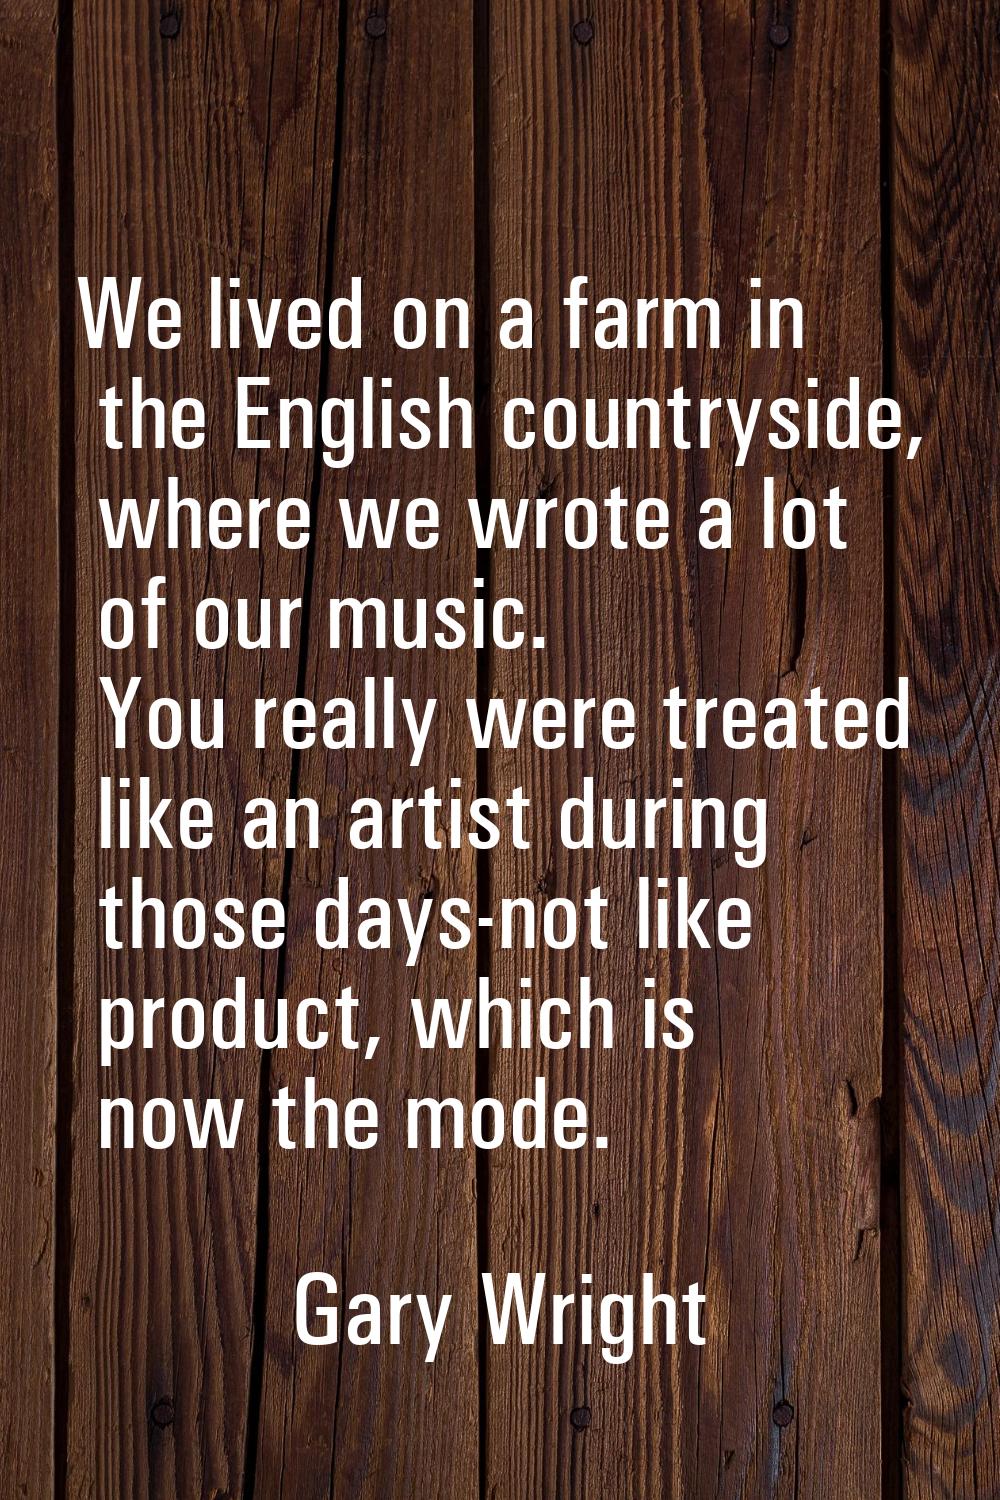 We lived on a farm in the English countryside, where we wrote a lot of our music. You really were t